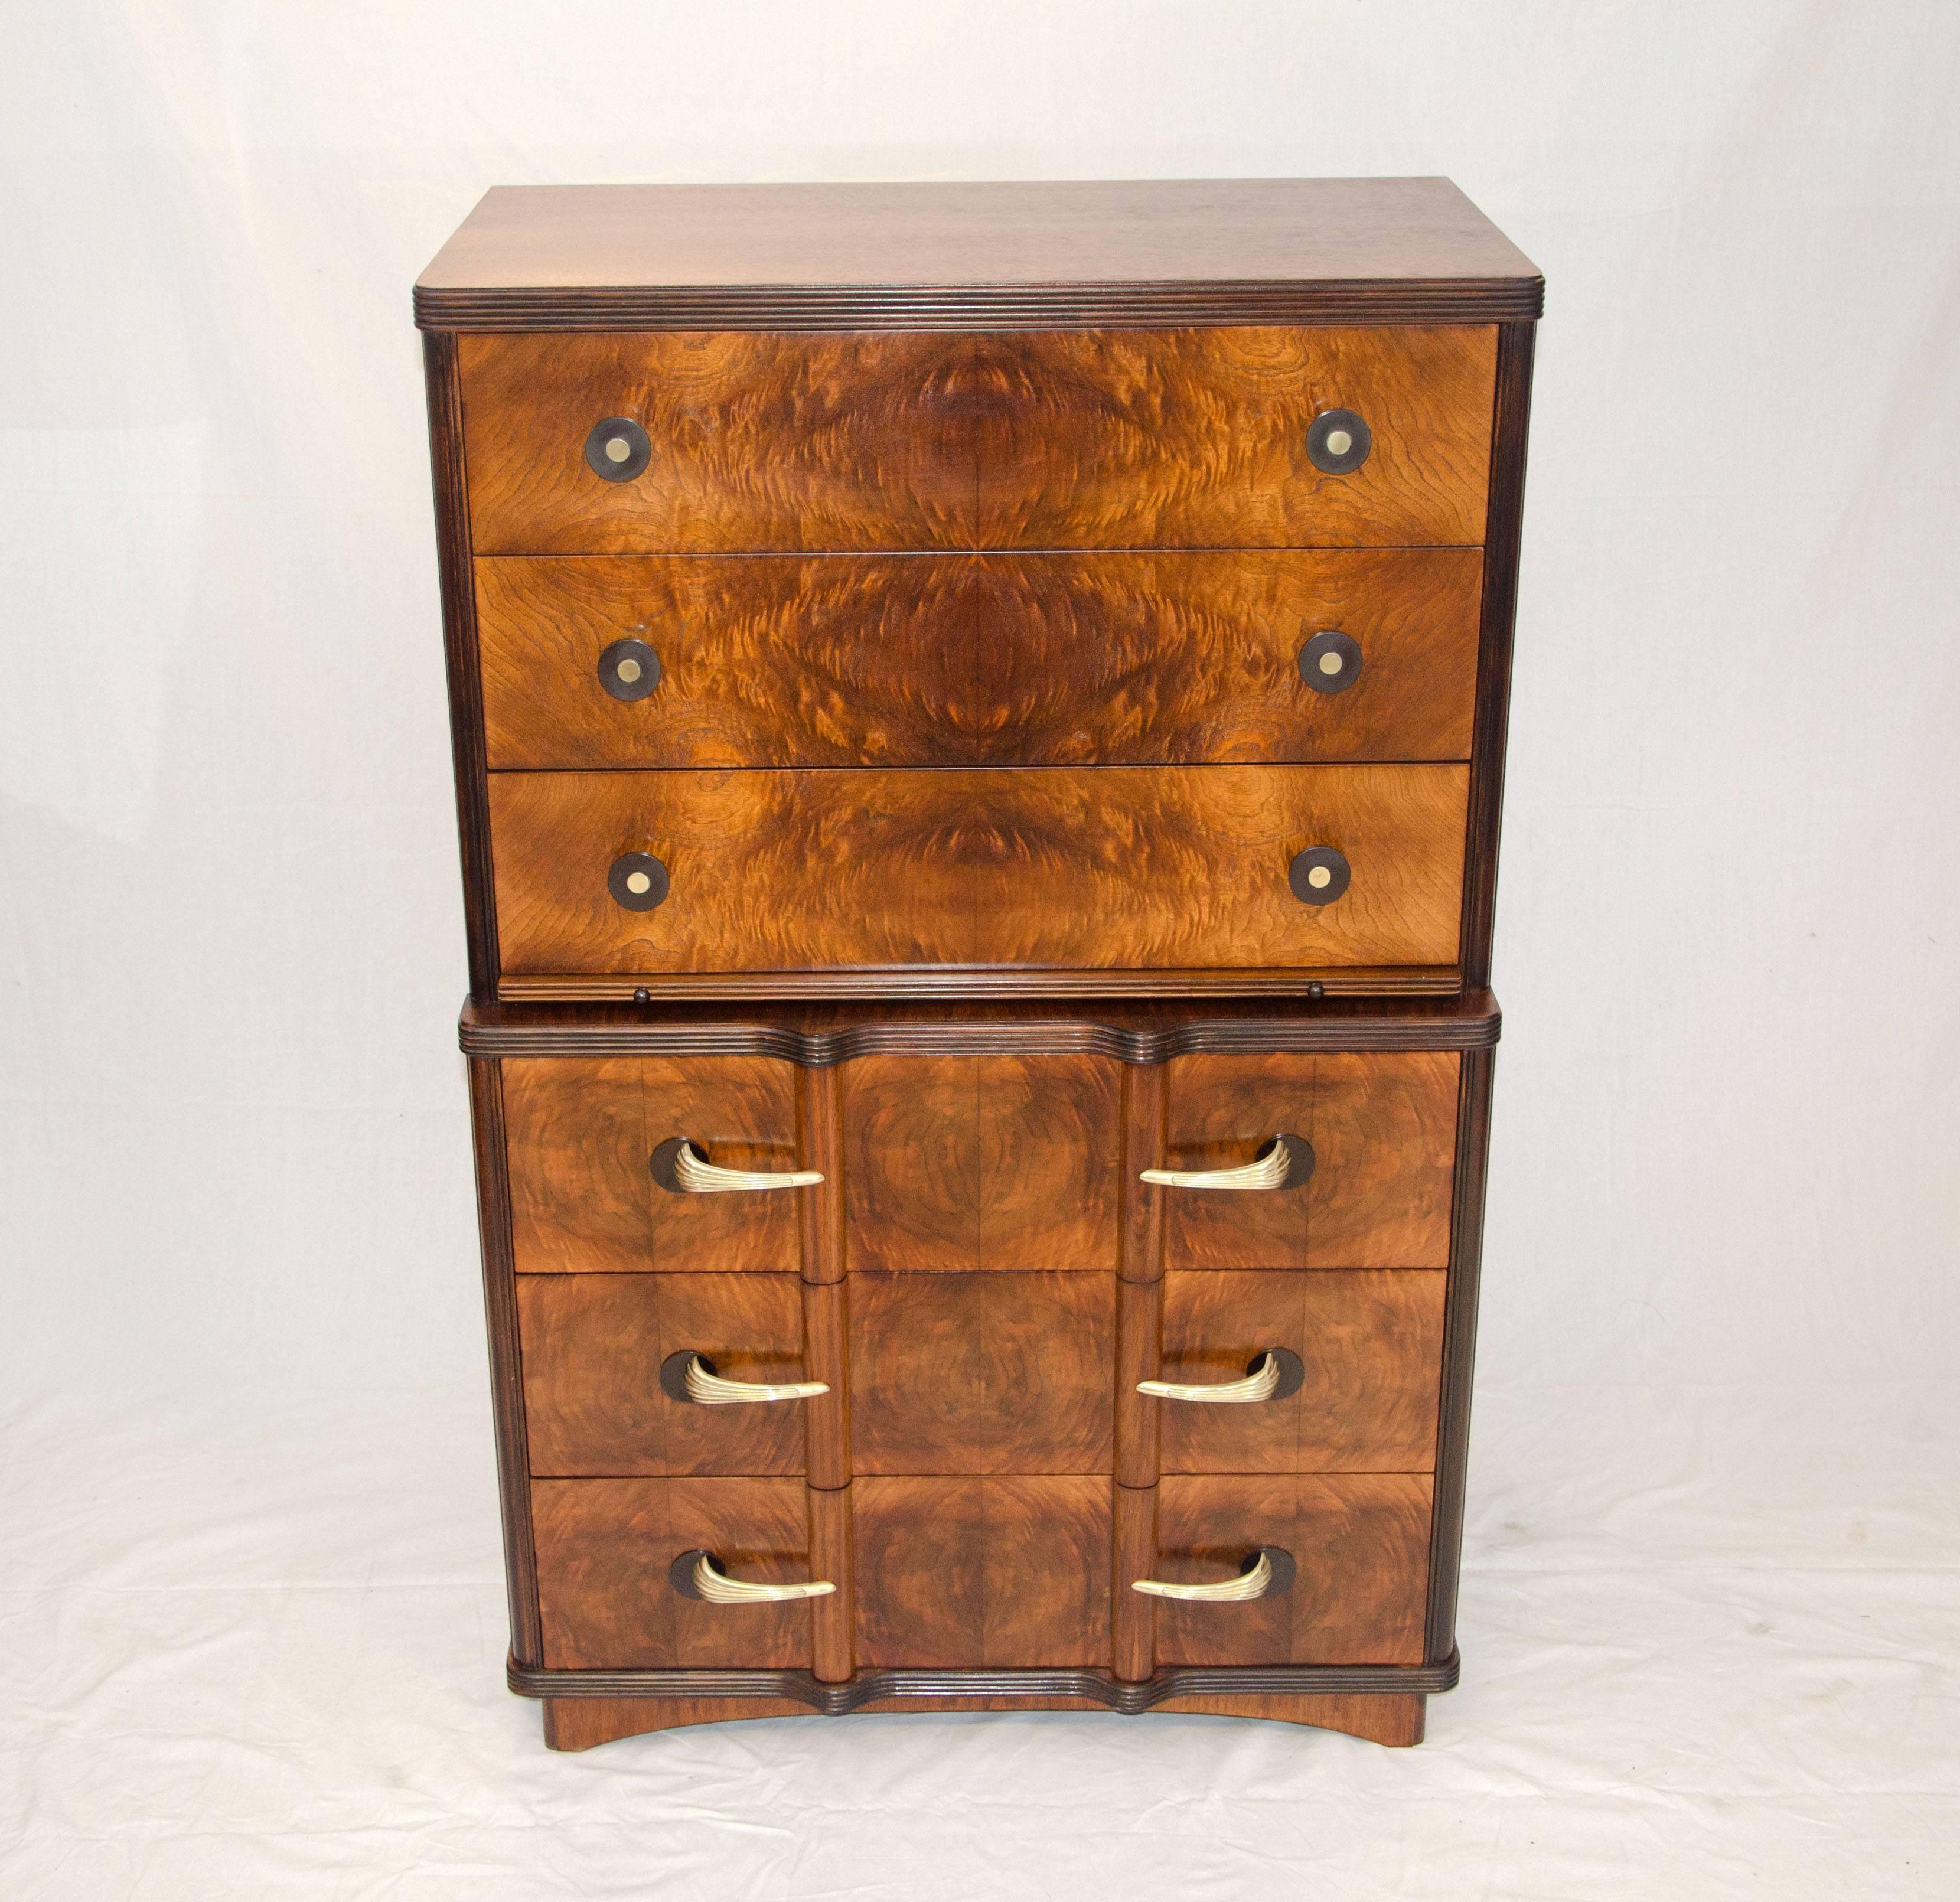  Nice burl walnut highboy dresser that has a few features, each side has a semicircular inlay, there is a pull-out shelf in the center to co-ordinate shirts and sweater outfits, there is a cedar lined bottom drawer for sweater storage. Drawer pulls